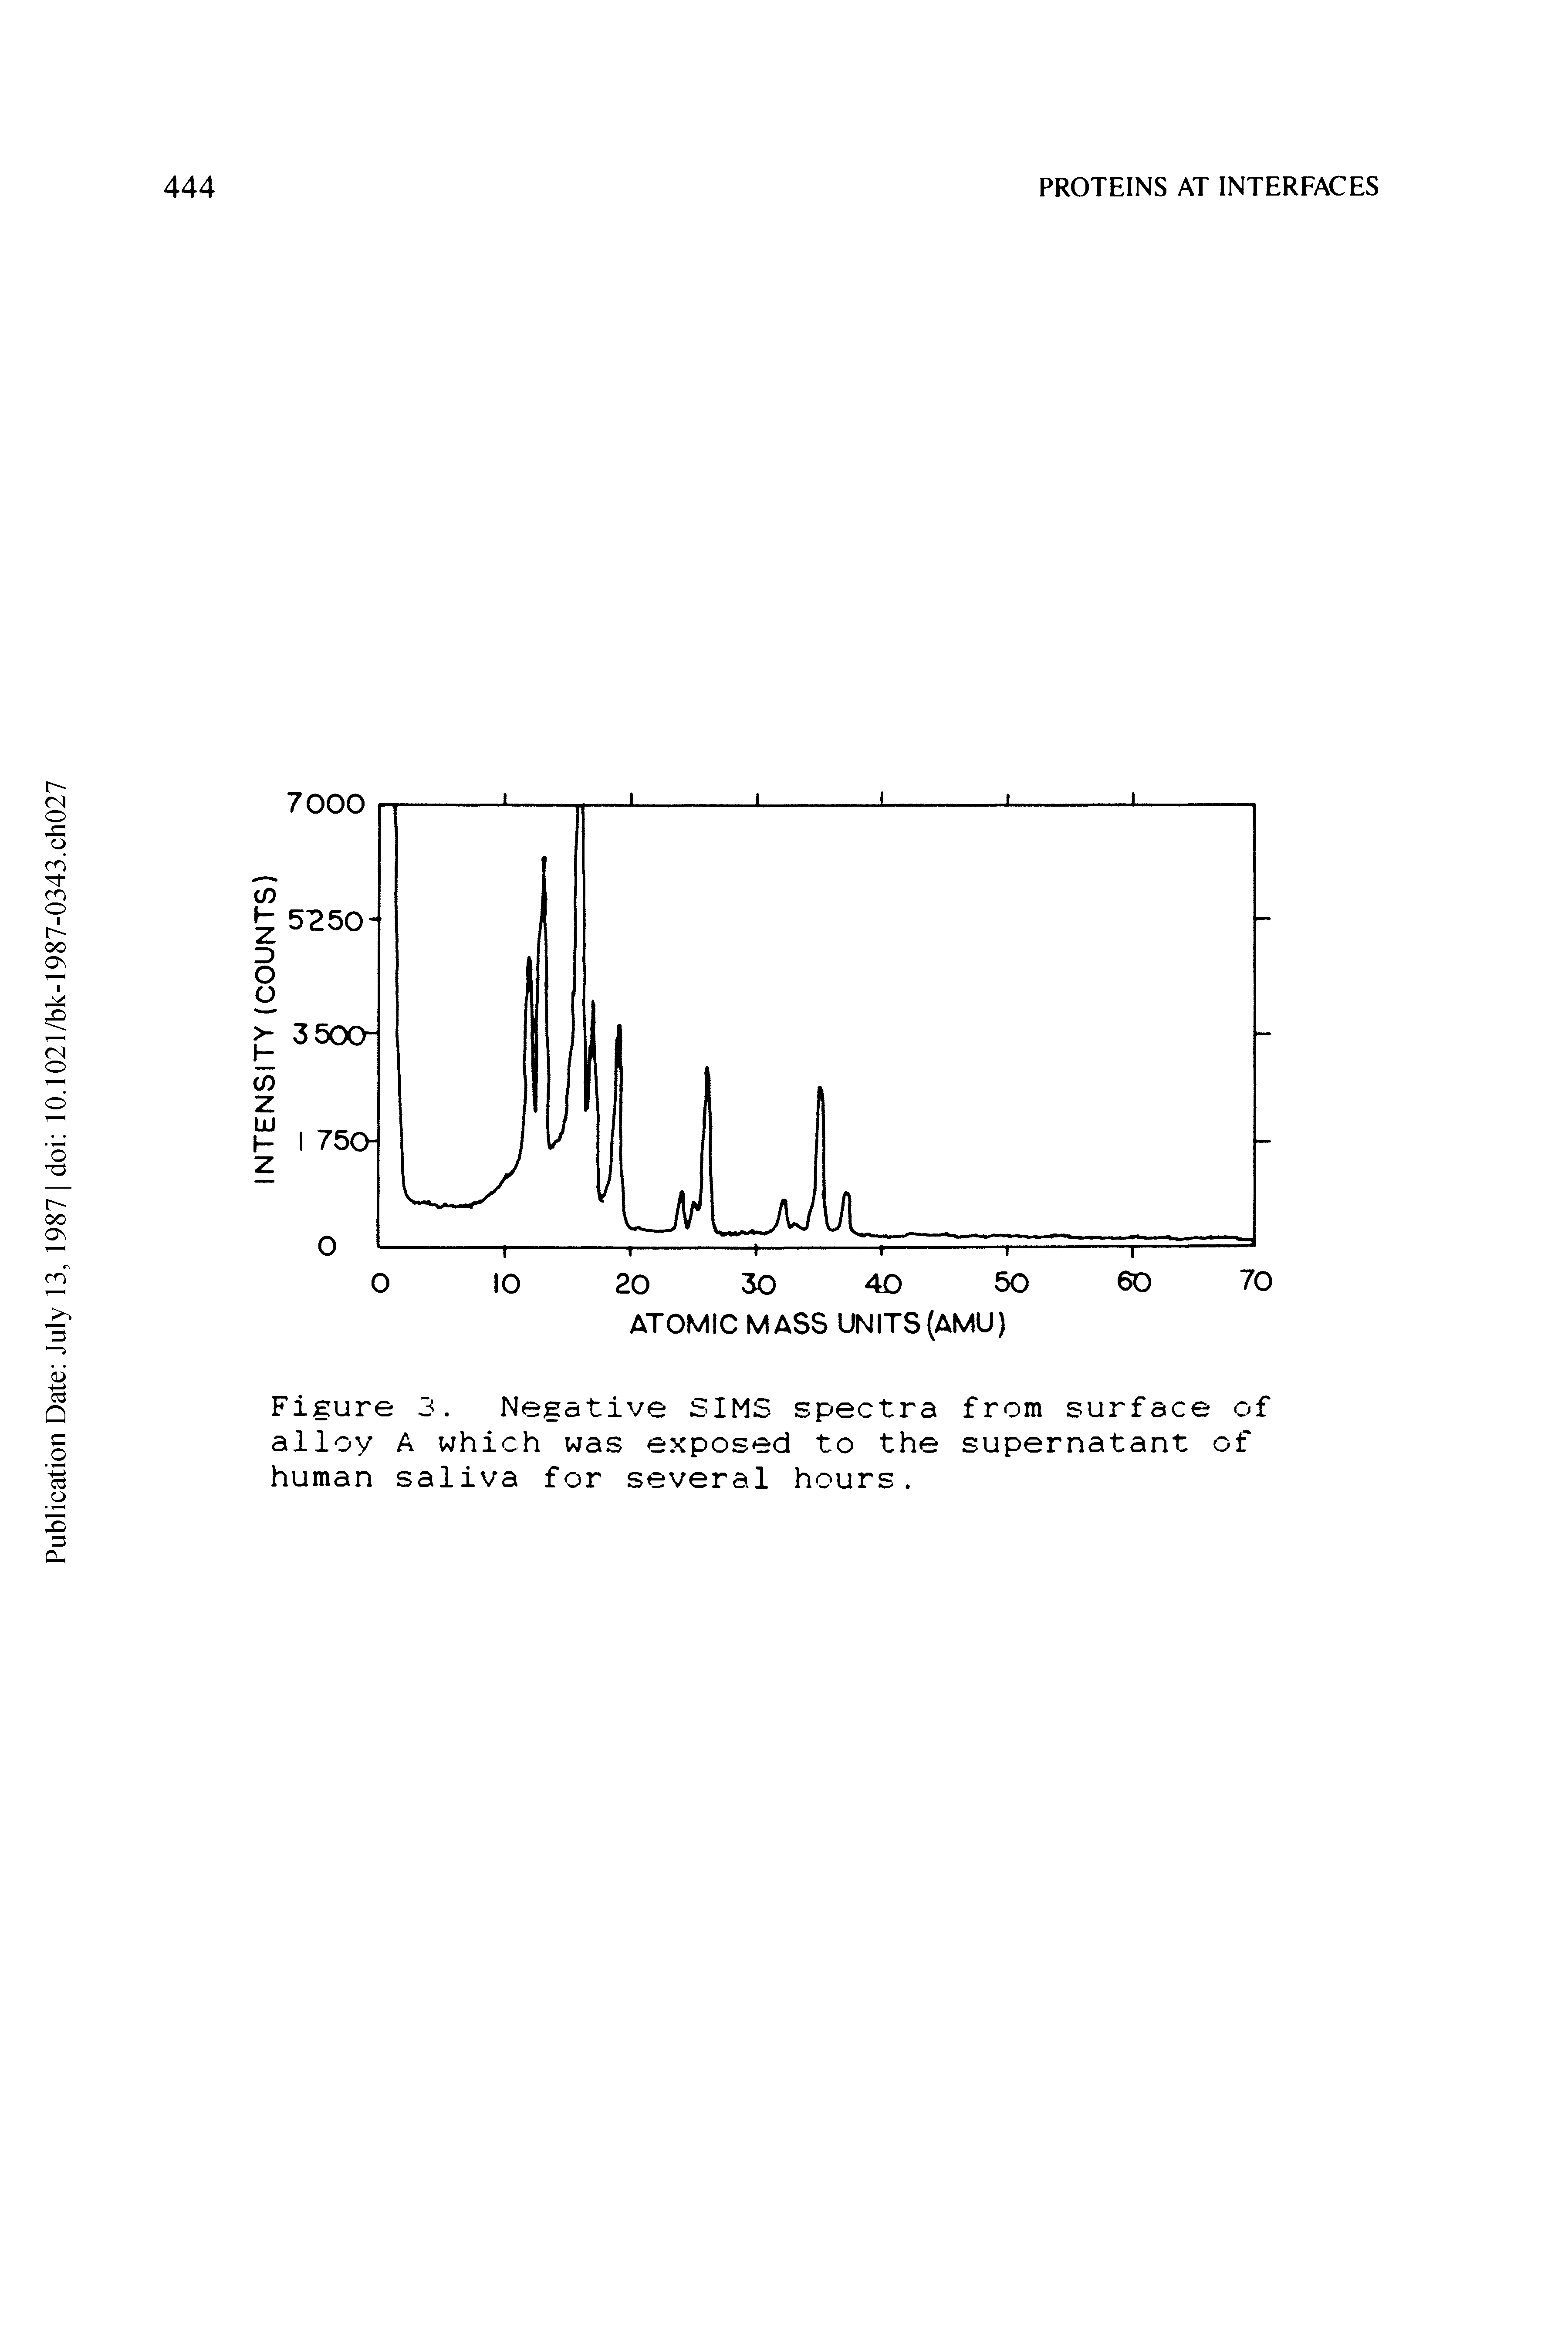 Figure 3. Negative SIMS spectra from surface of alloy A which was exposed to the supernatant of human saliva for several hours.